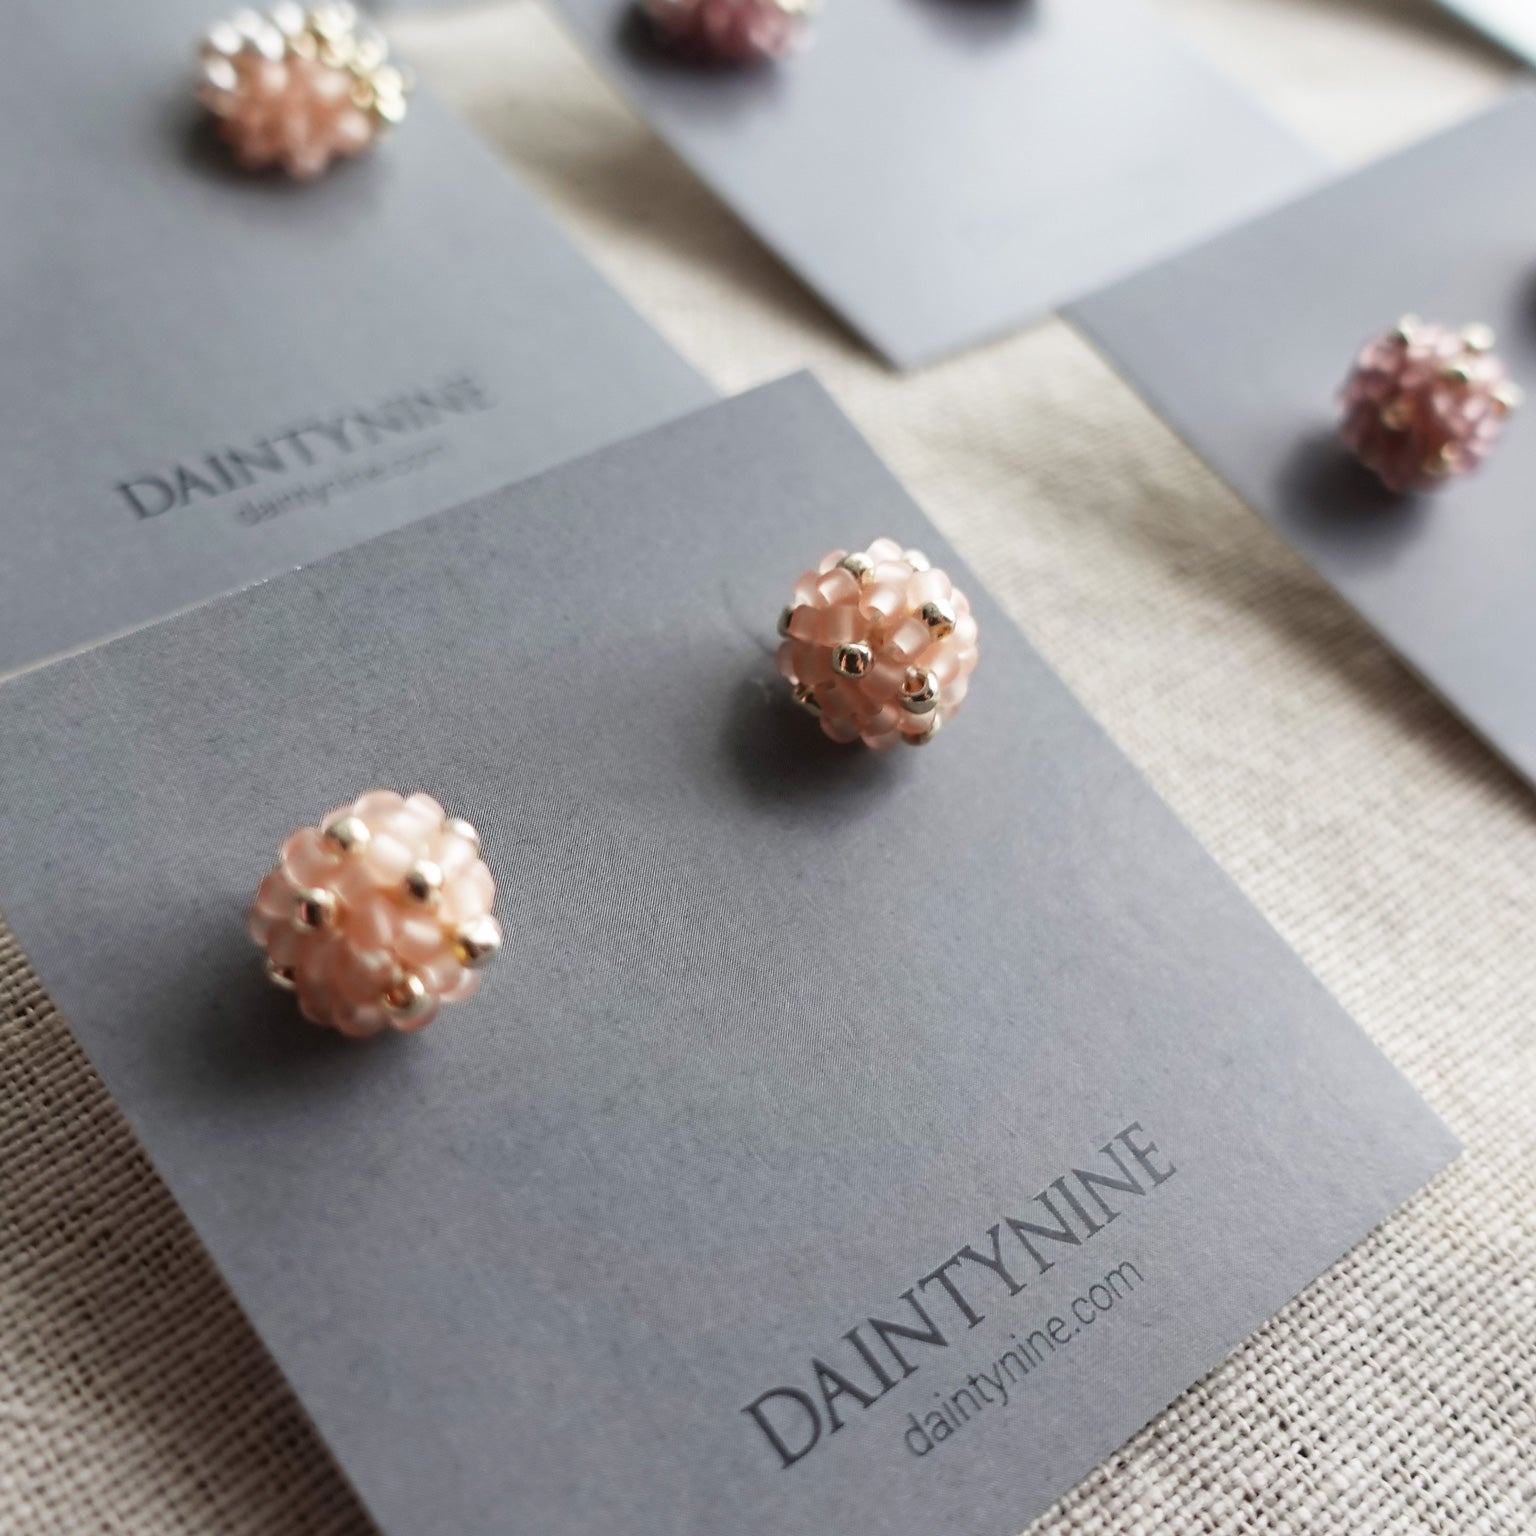 Orb Star Dust Stud Earrings in Blush Pink Card Close Up